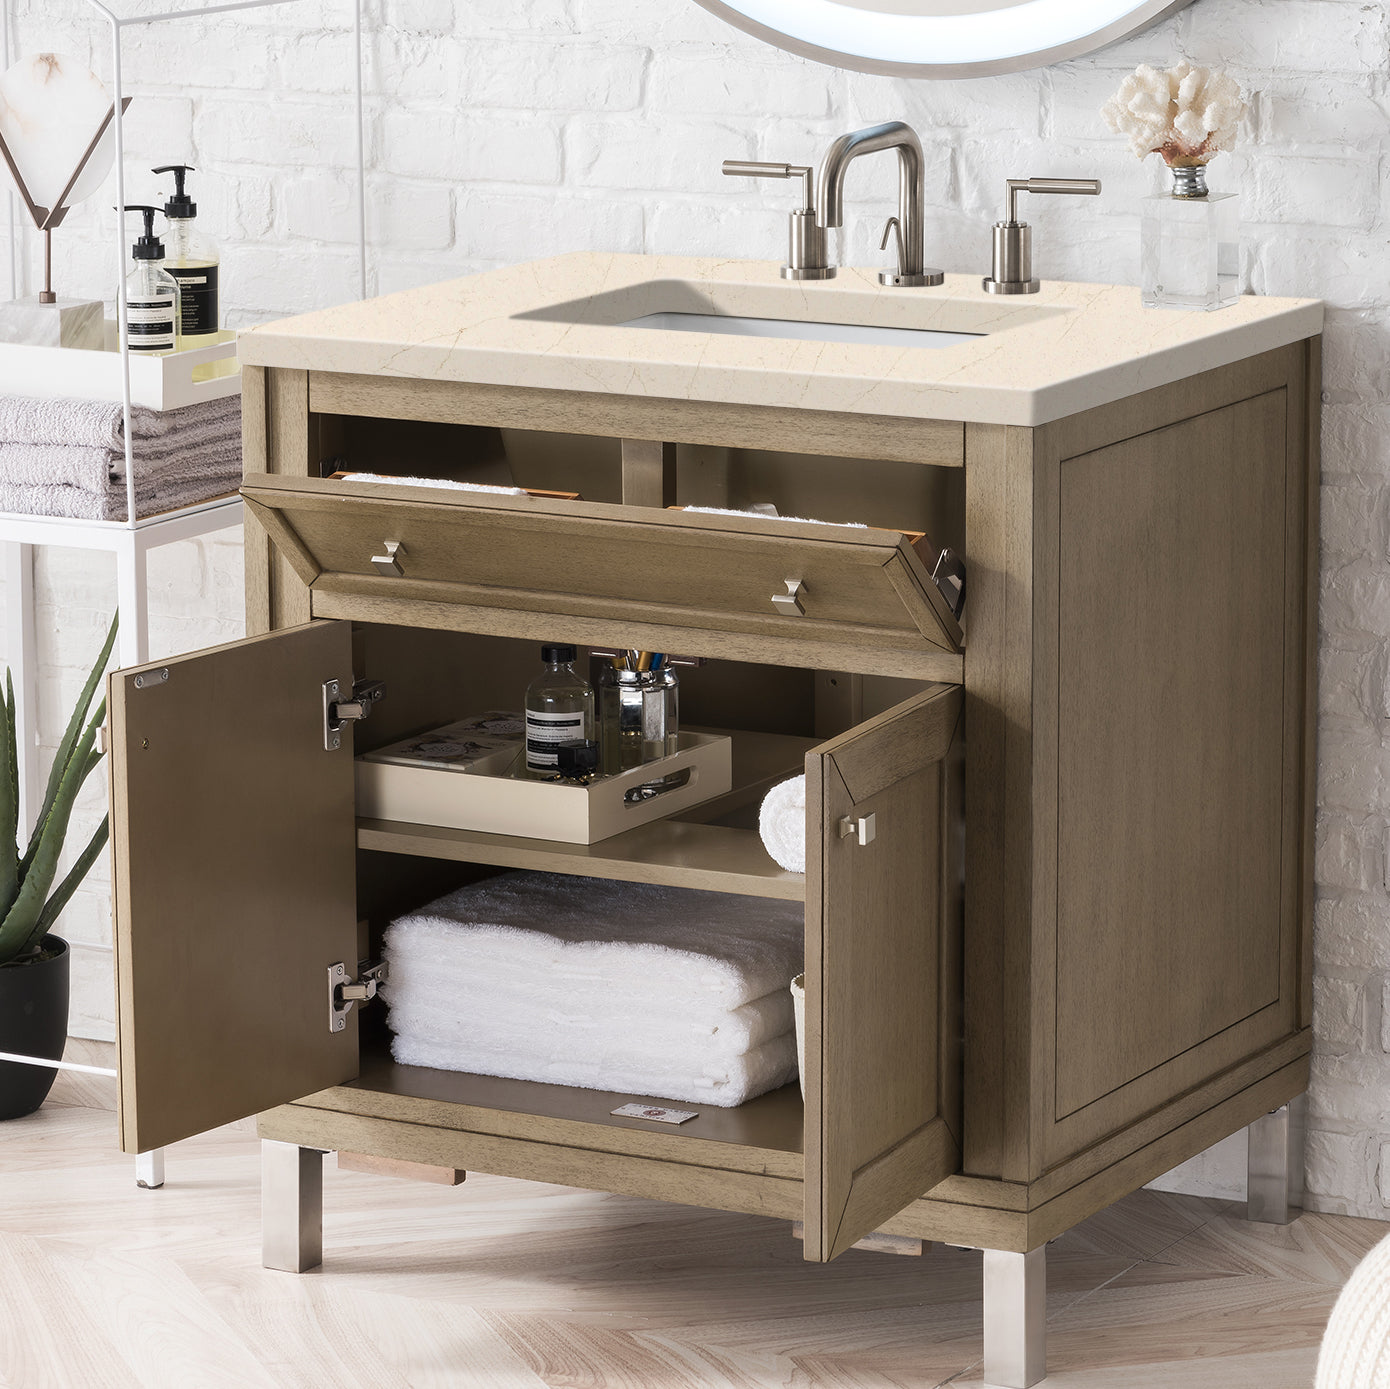 James Martin Vanities Chicago Collection 30 in. Single Vanity in Whitewashed Walnut with Countertop Options